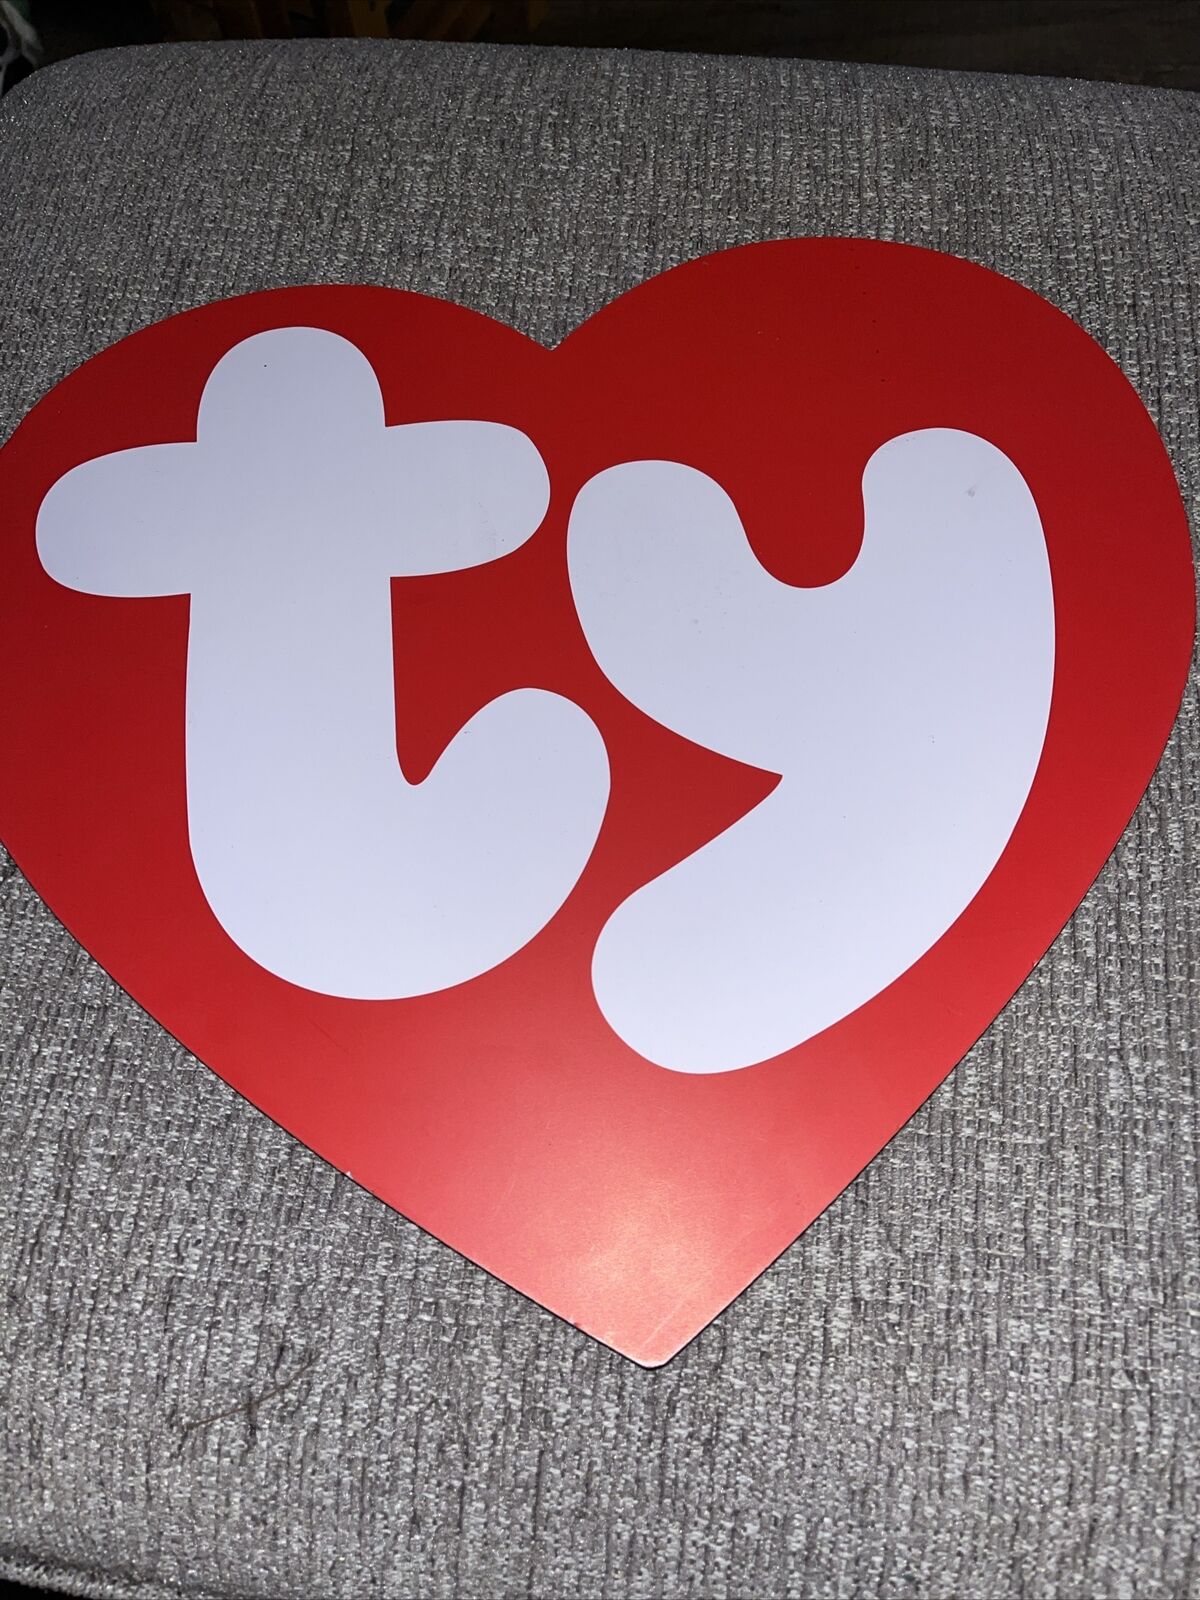 RARE TY BEANIE BABIES LARGE HEART SHAPED STORE RESIN DISPLAY SIGN 14.5\